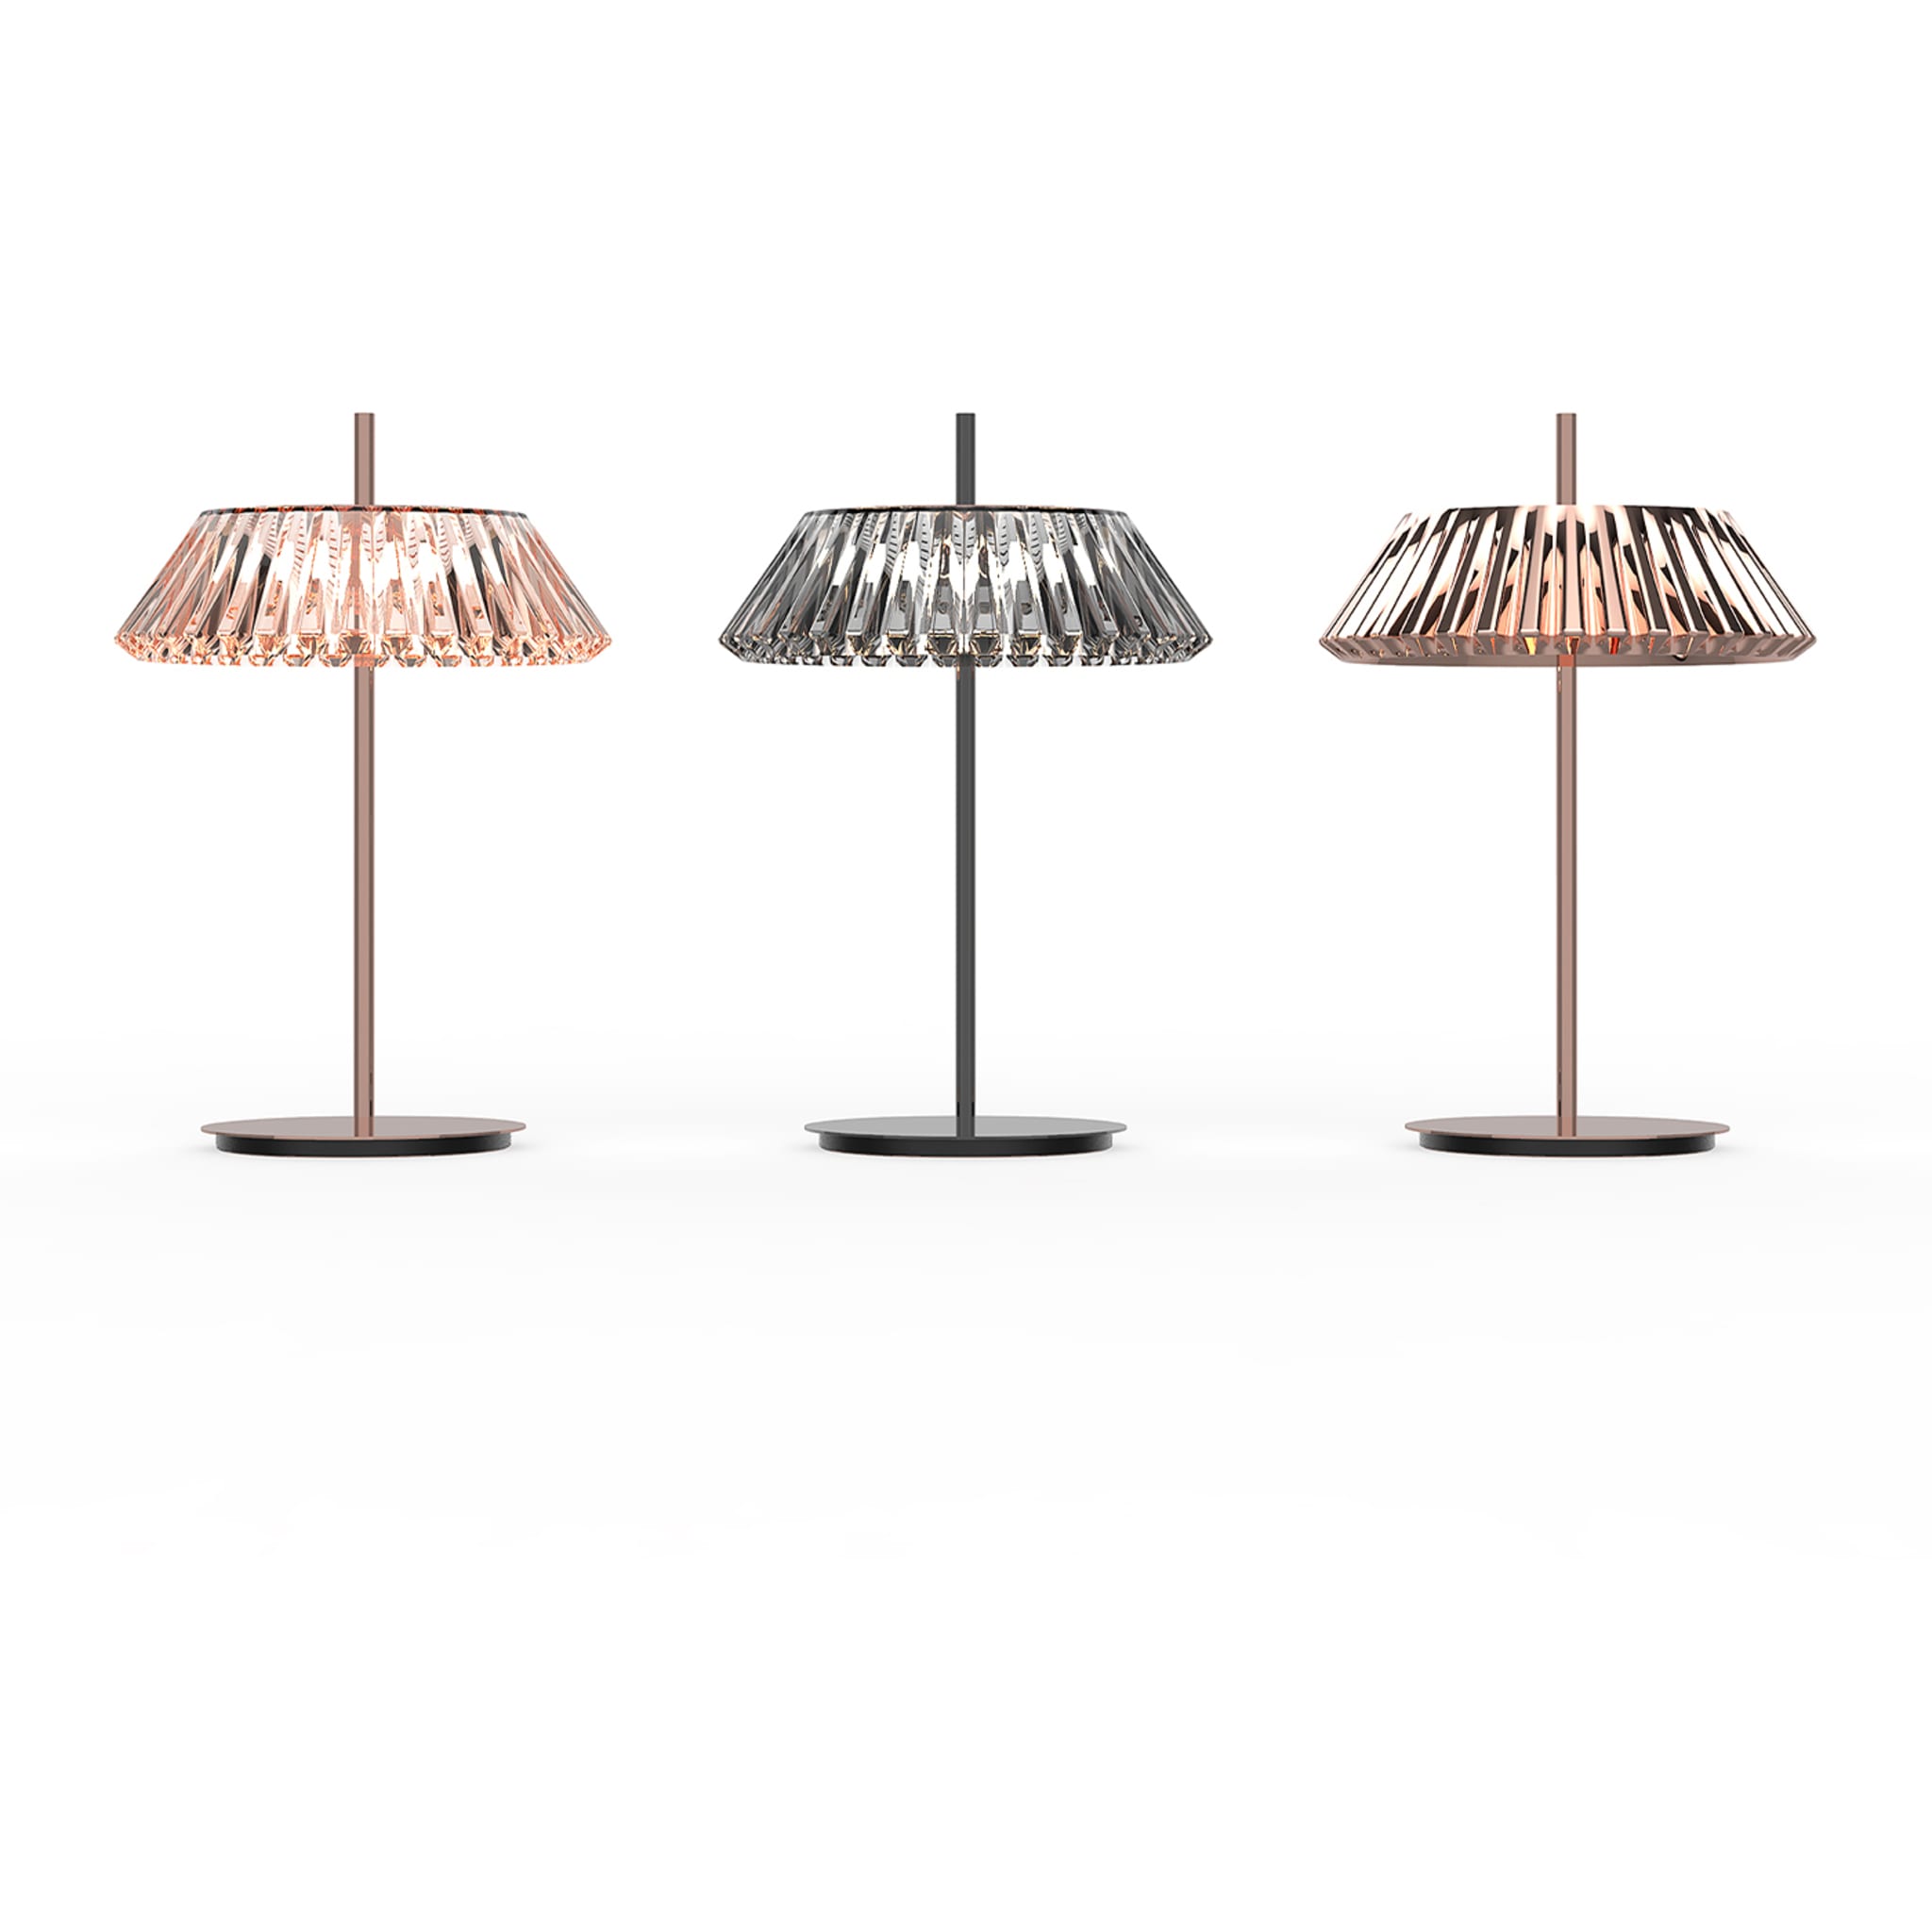 Chrome 3-Light Coppery Table Lamp by MAM Design - Alternative view 1